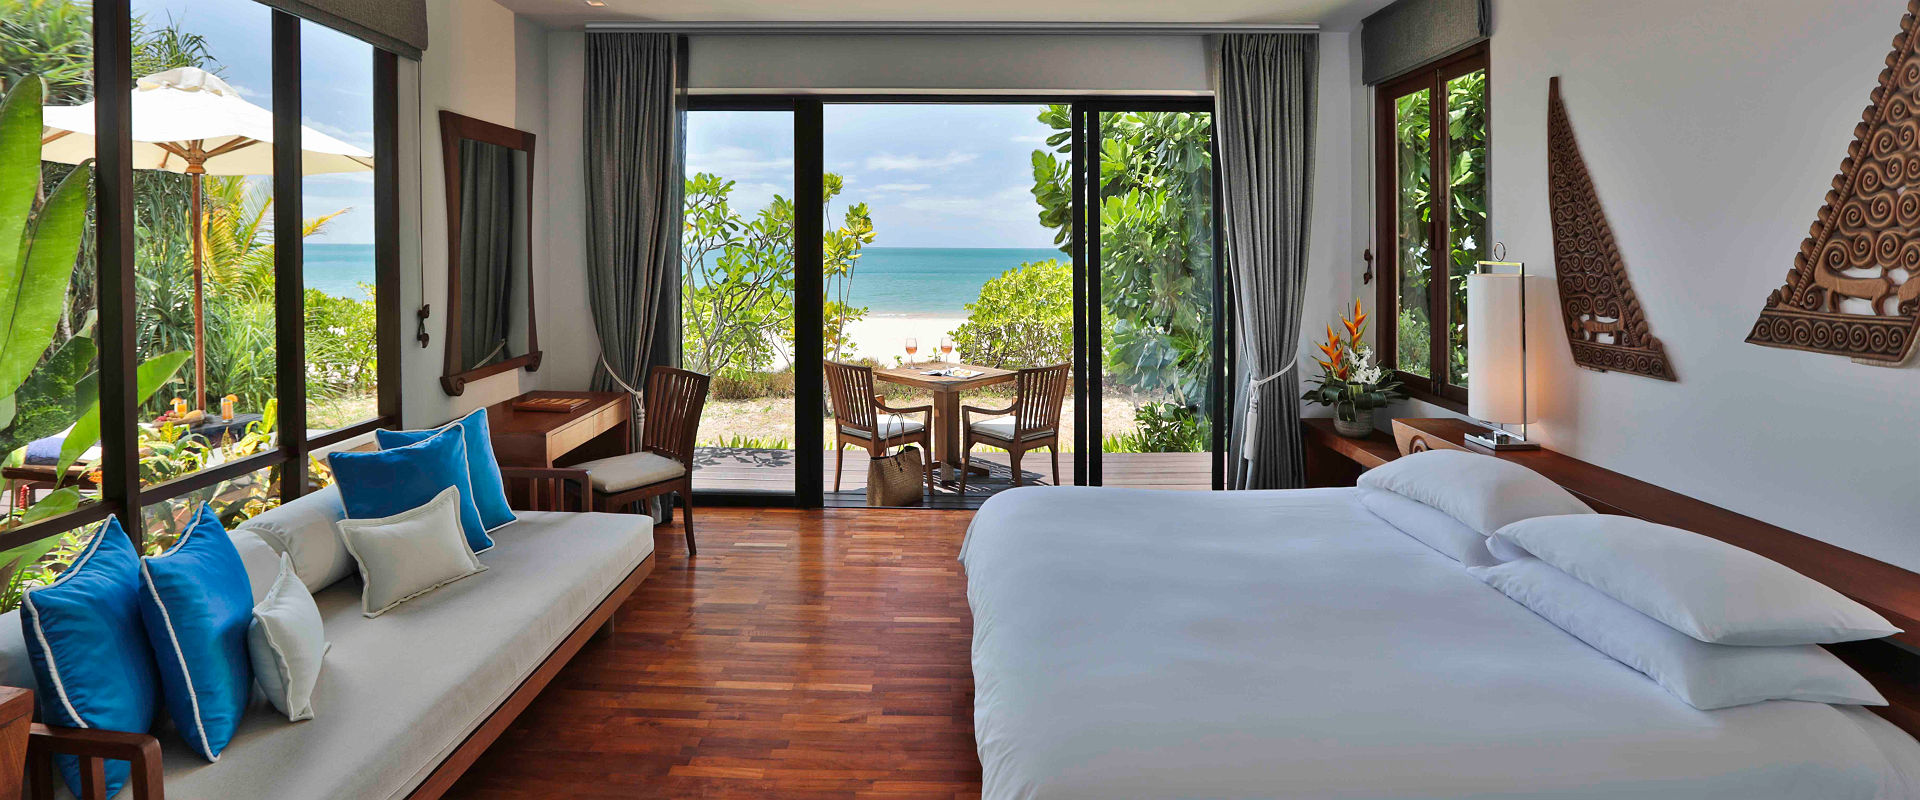 Pimalai Resort and Spa - beachside pavilion suite one bedroom - chambre